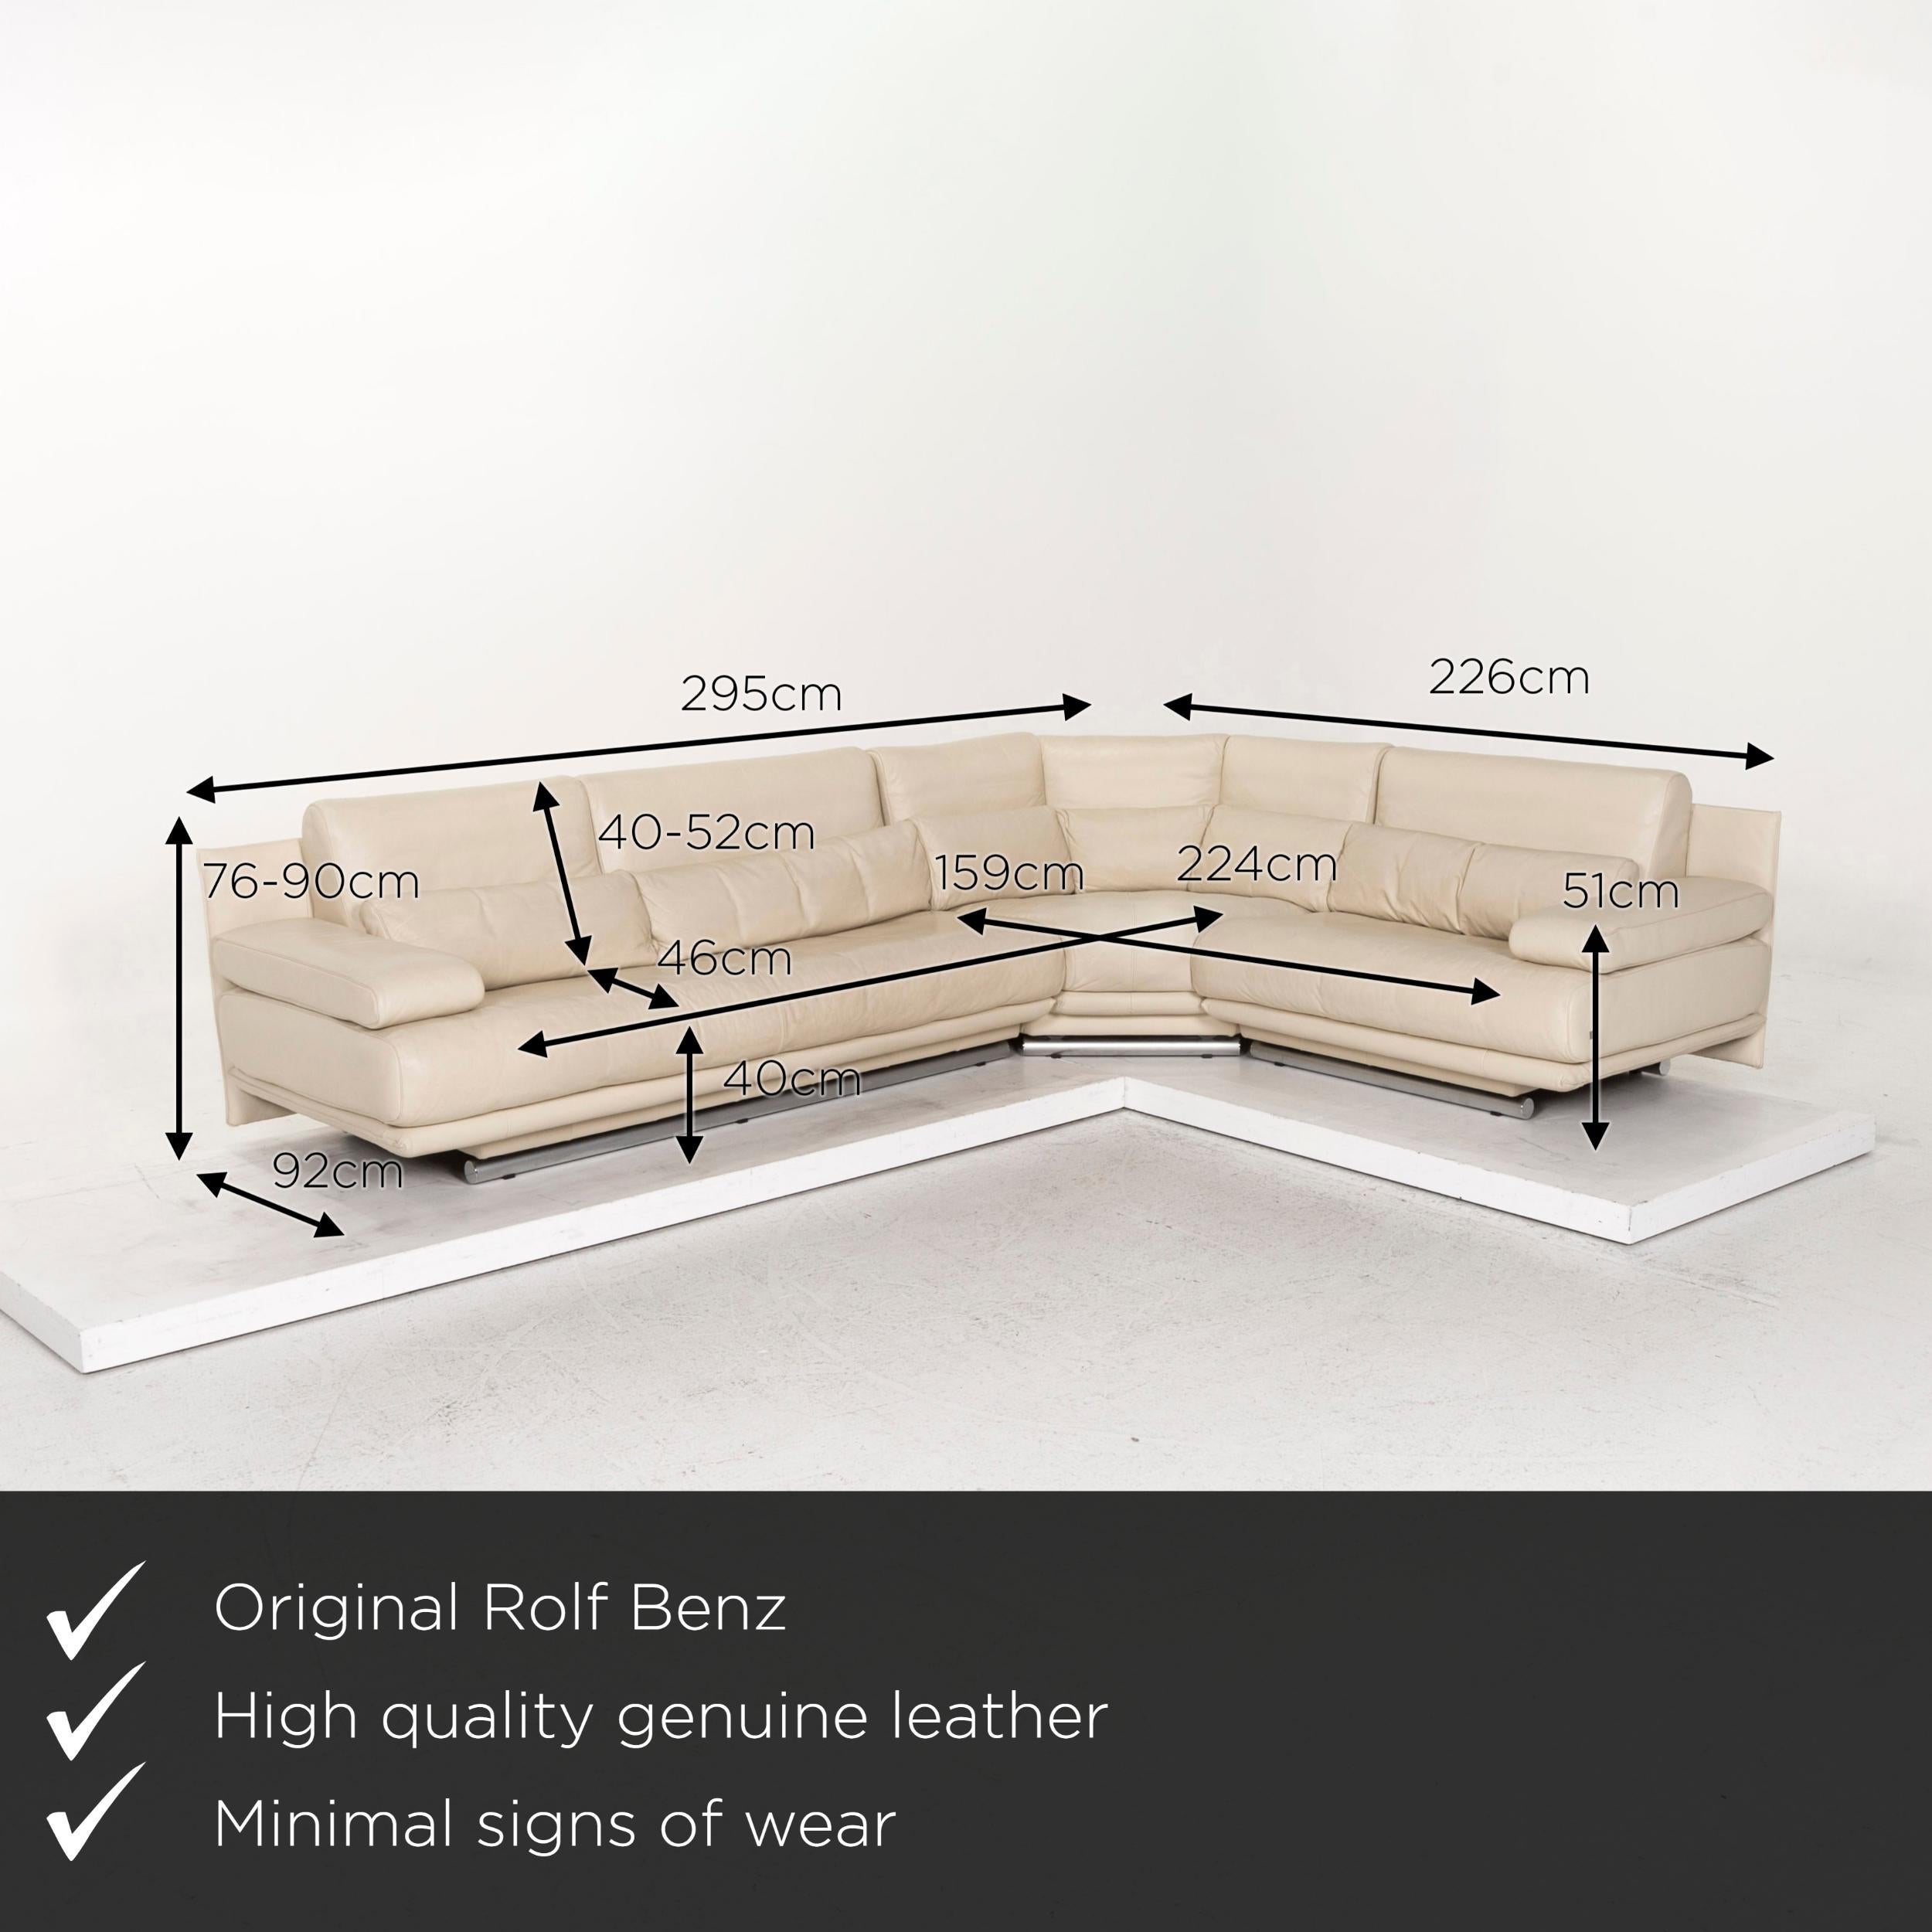 We present to you a Rolf Benz 6500 leather sofa set cream 1x corner sofa 1x stool.
 

 Product measurements in centimeters:
 

Depth 92
Width 295
Height 76
Seat height 40
Rest height 51
Seat depth 46
Seat width 224
Back height 40.

 